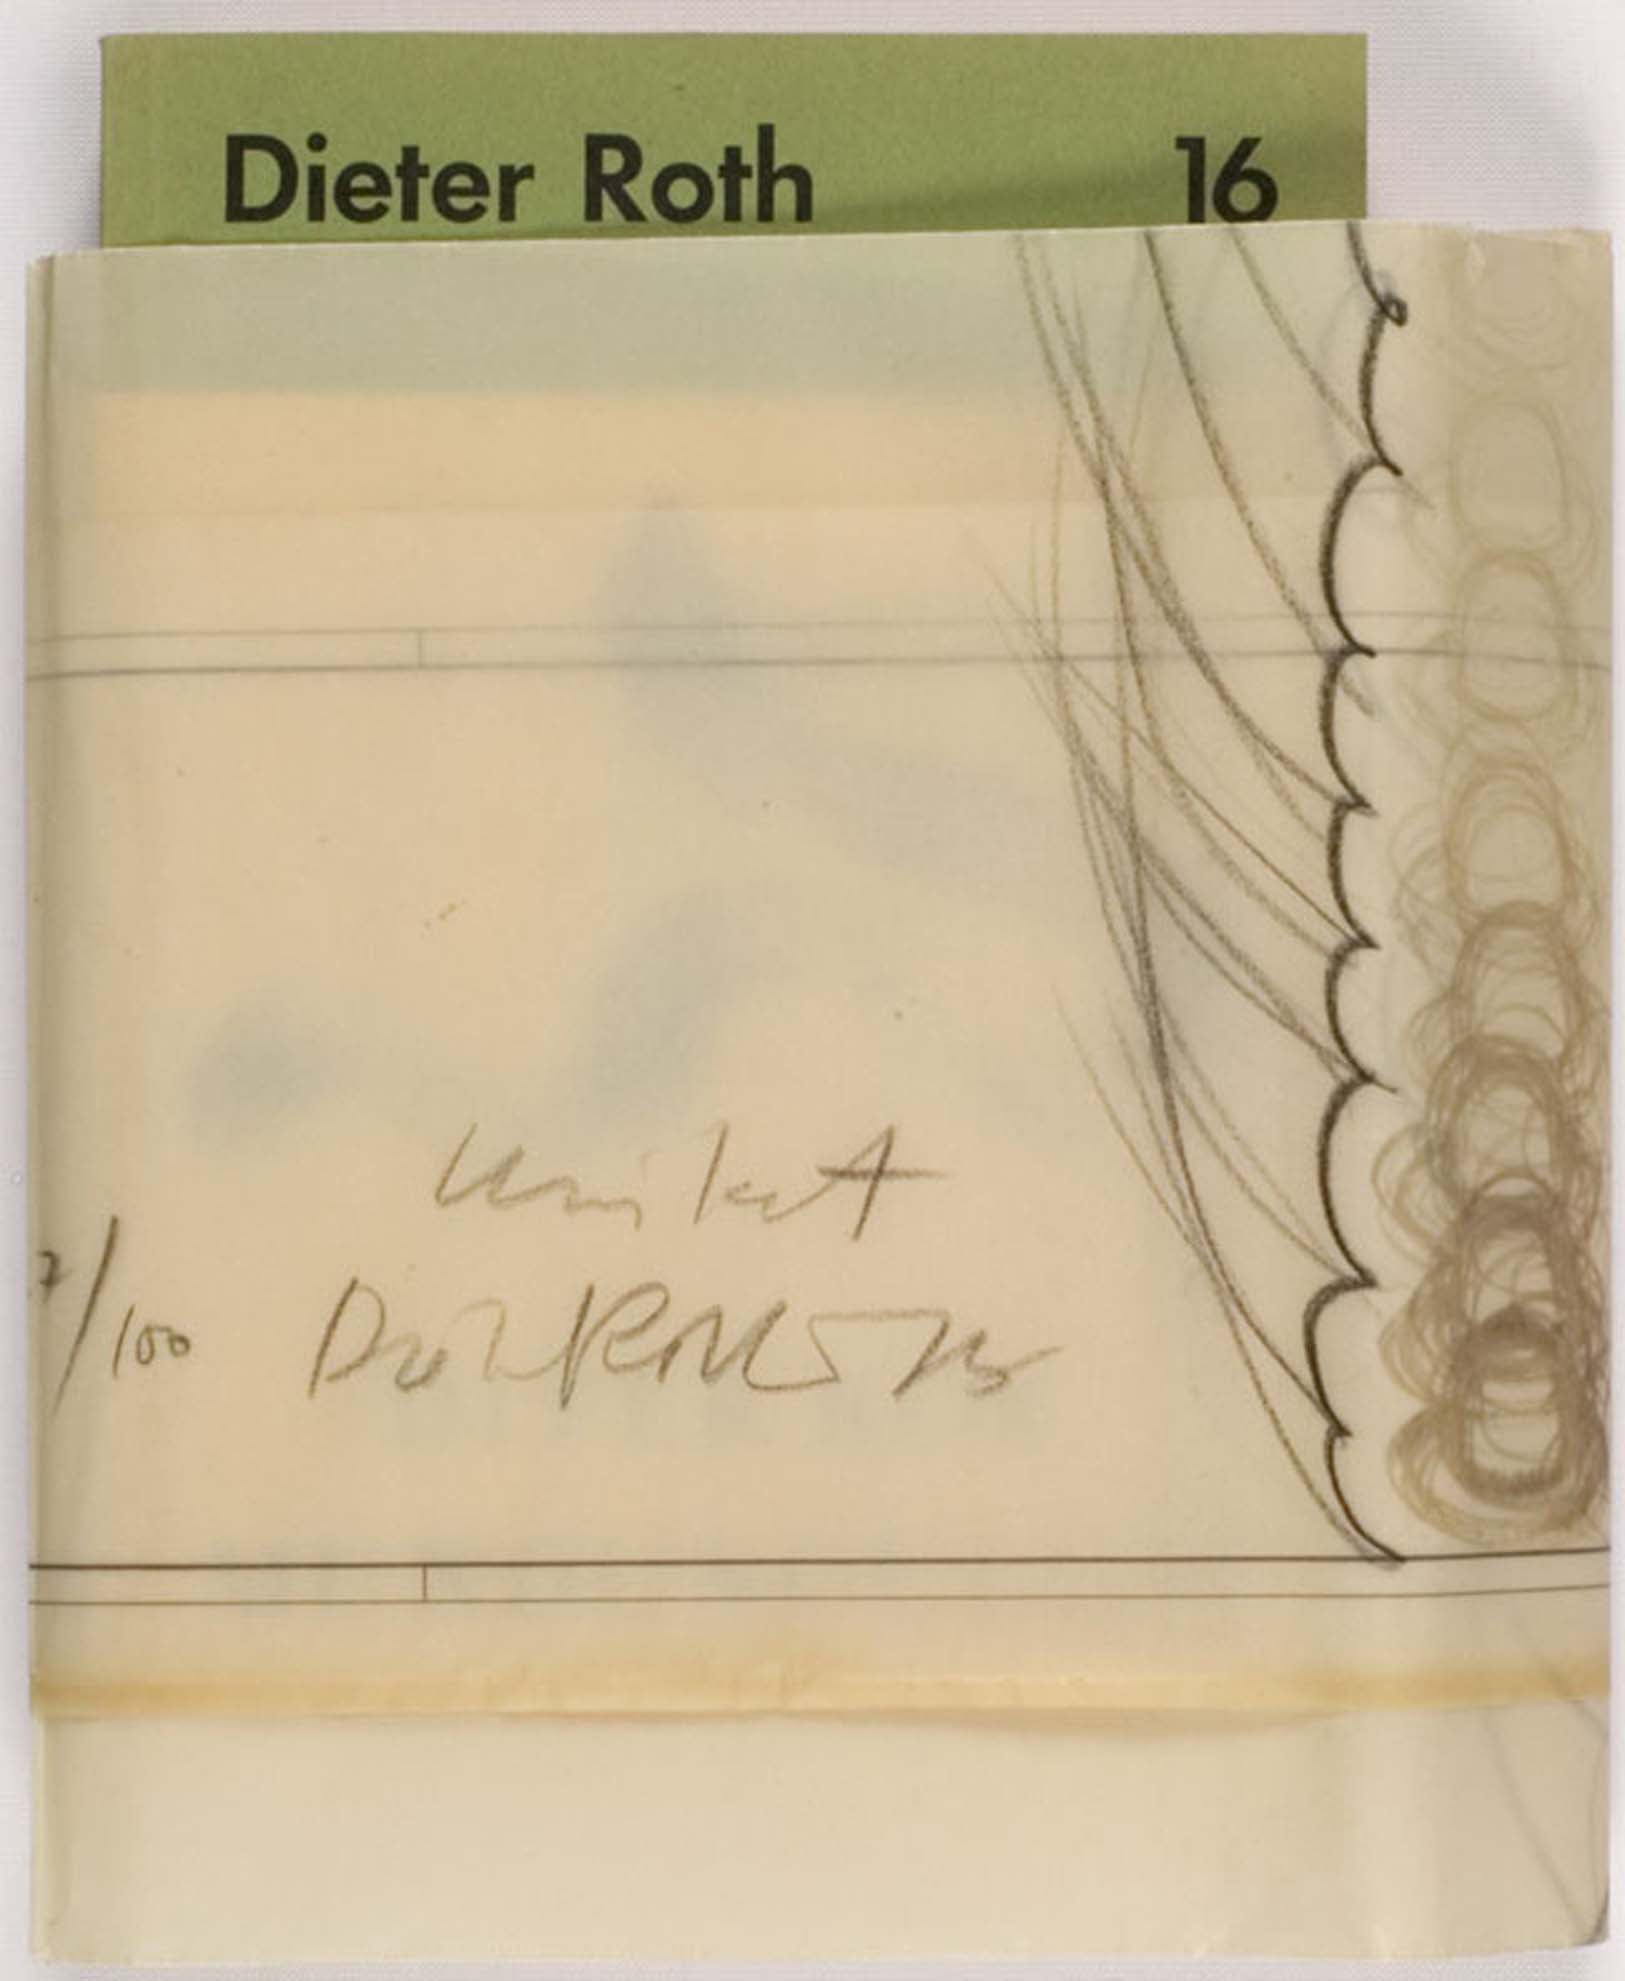 Dieter-Roth-Collected-Works,-Volume-16:-MUNDUCULUM.-Deluxe-Edition-1975